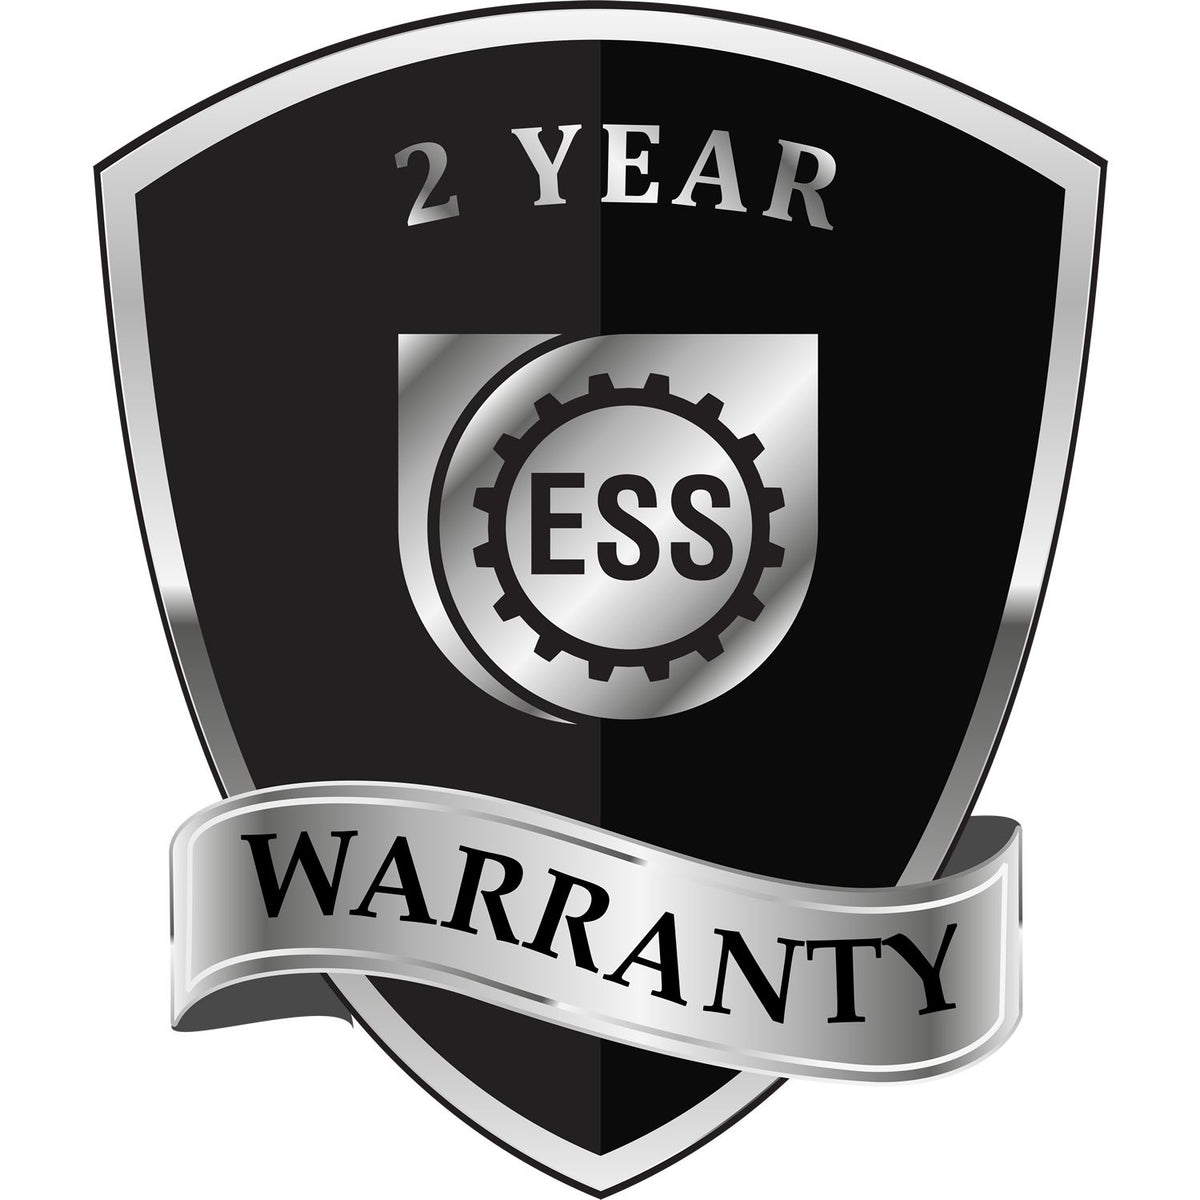 A black and silver badge or emblem showing warranty information for the Heavy Duty Cast Iron New York Geologist Seal Embosser